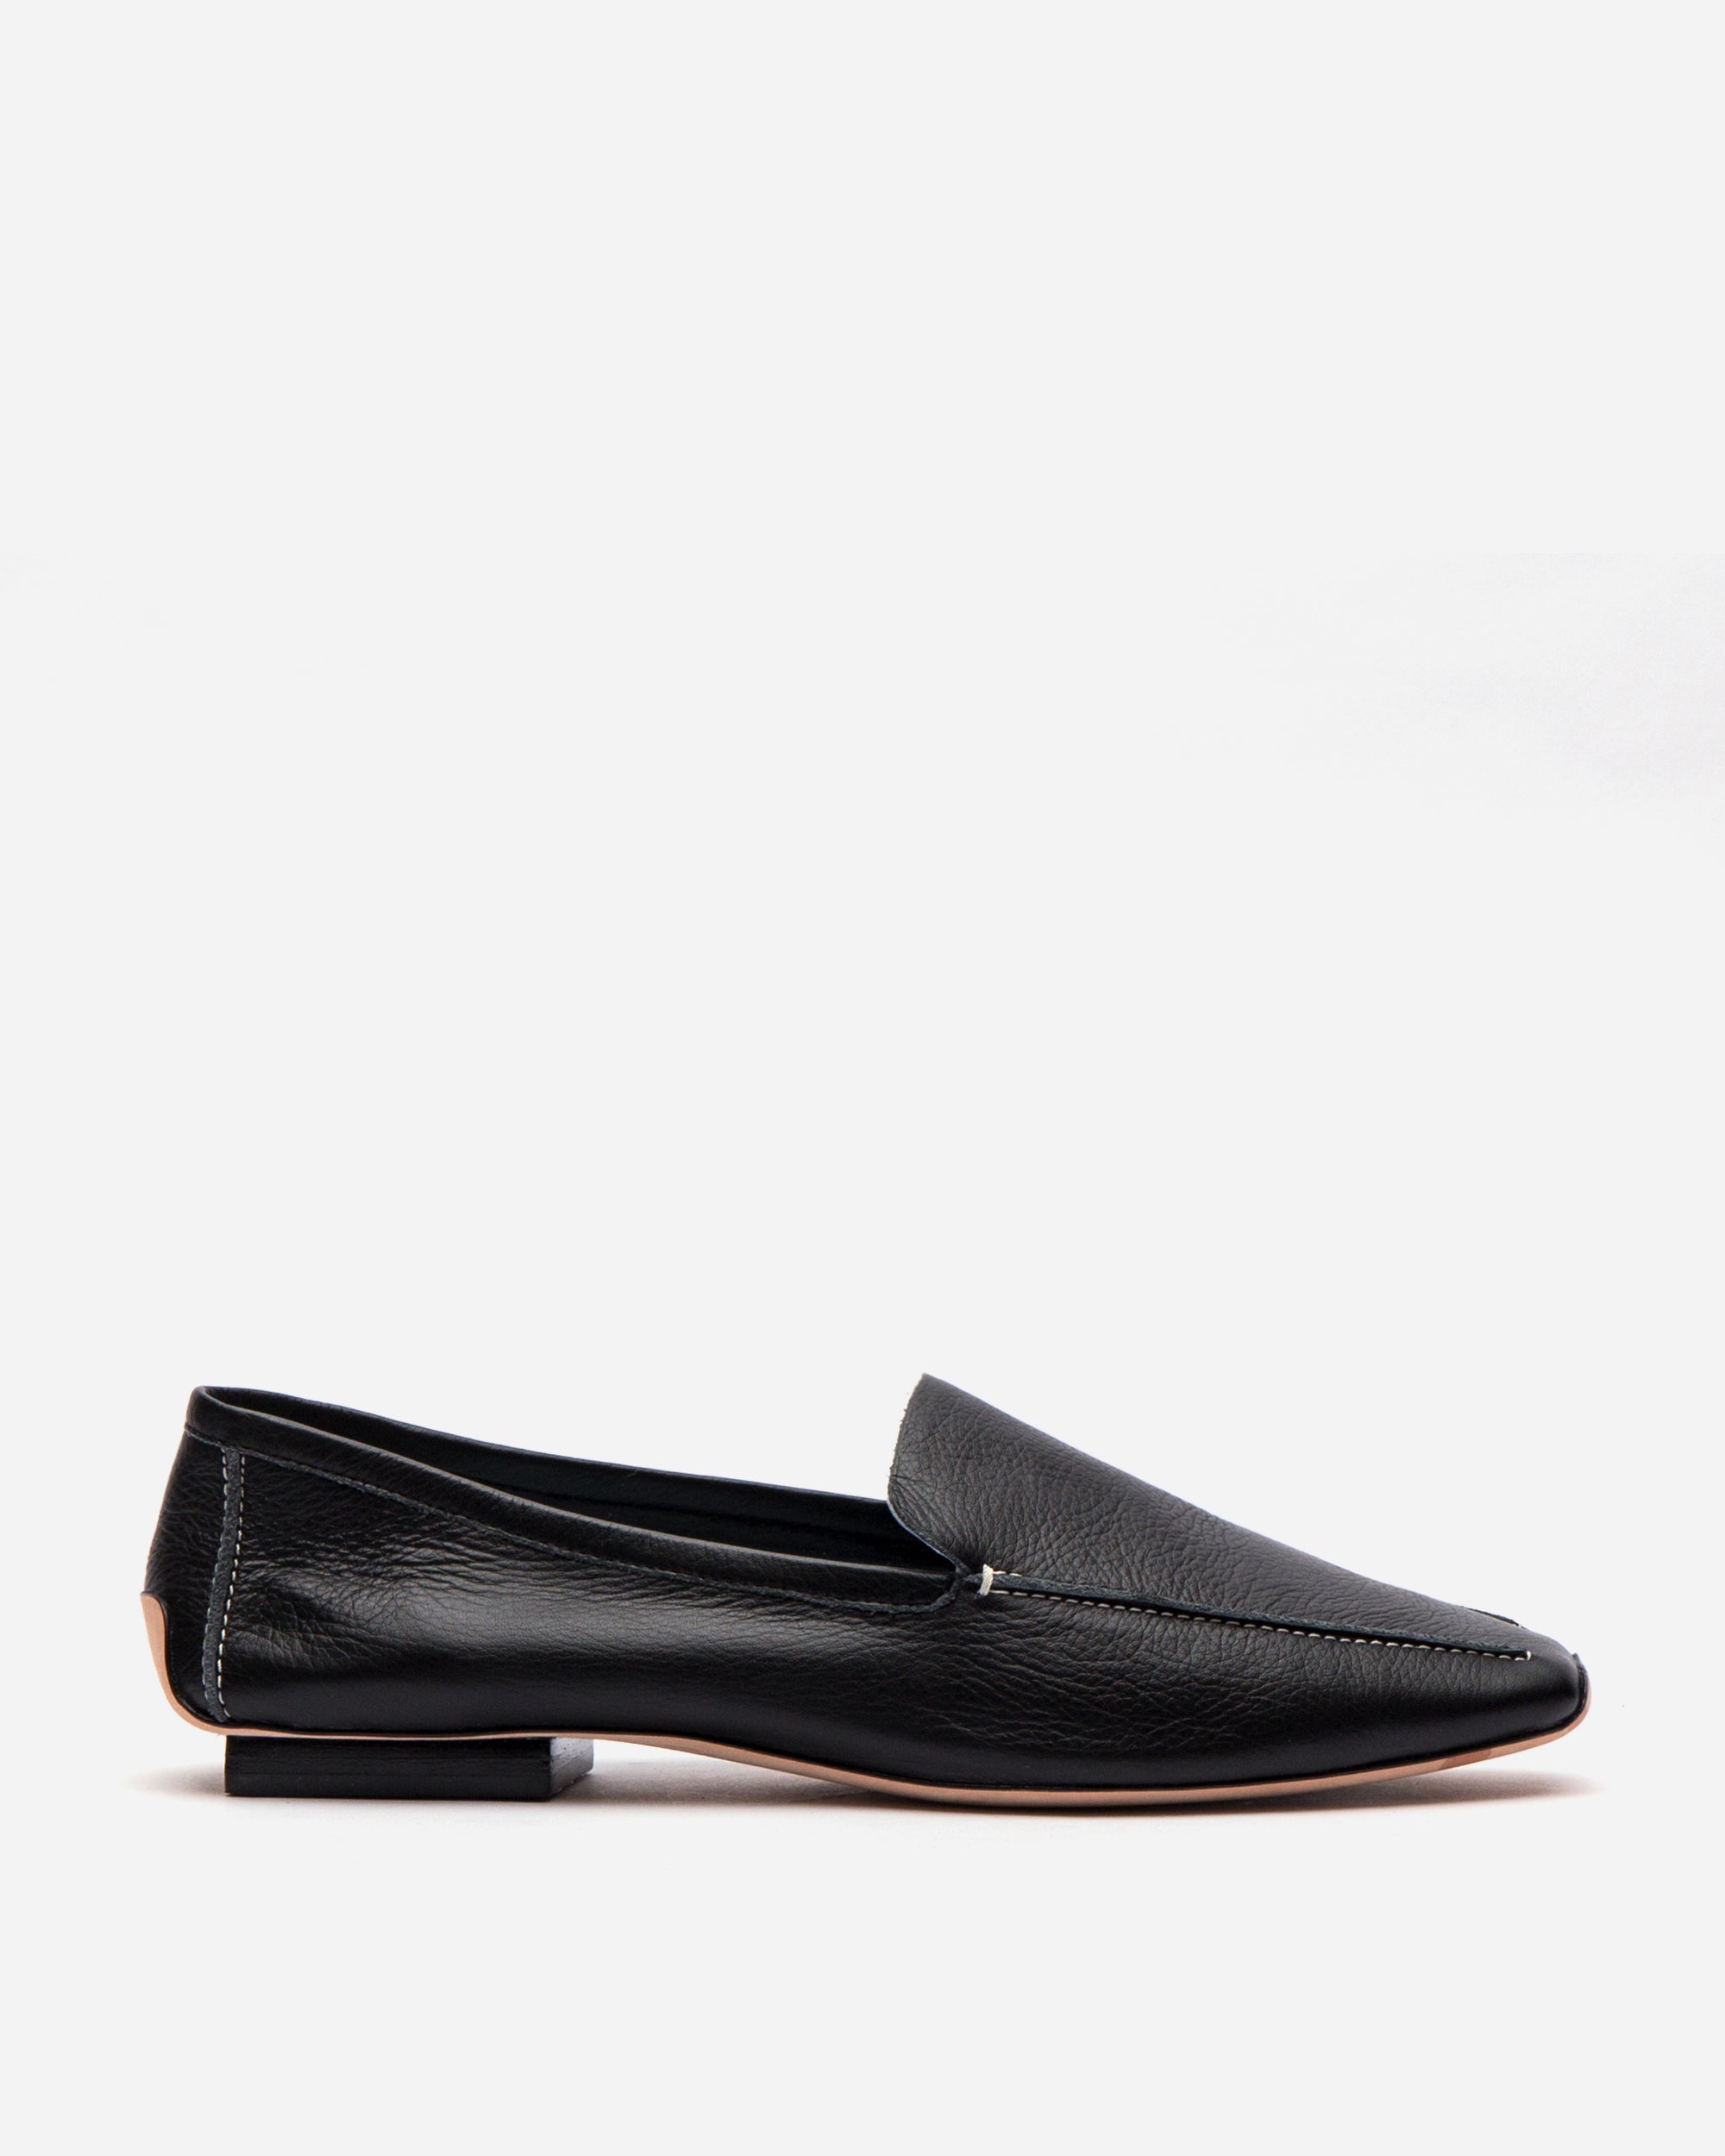 simple loafer shoes